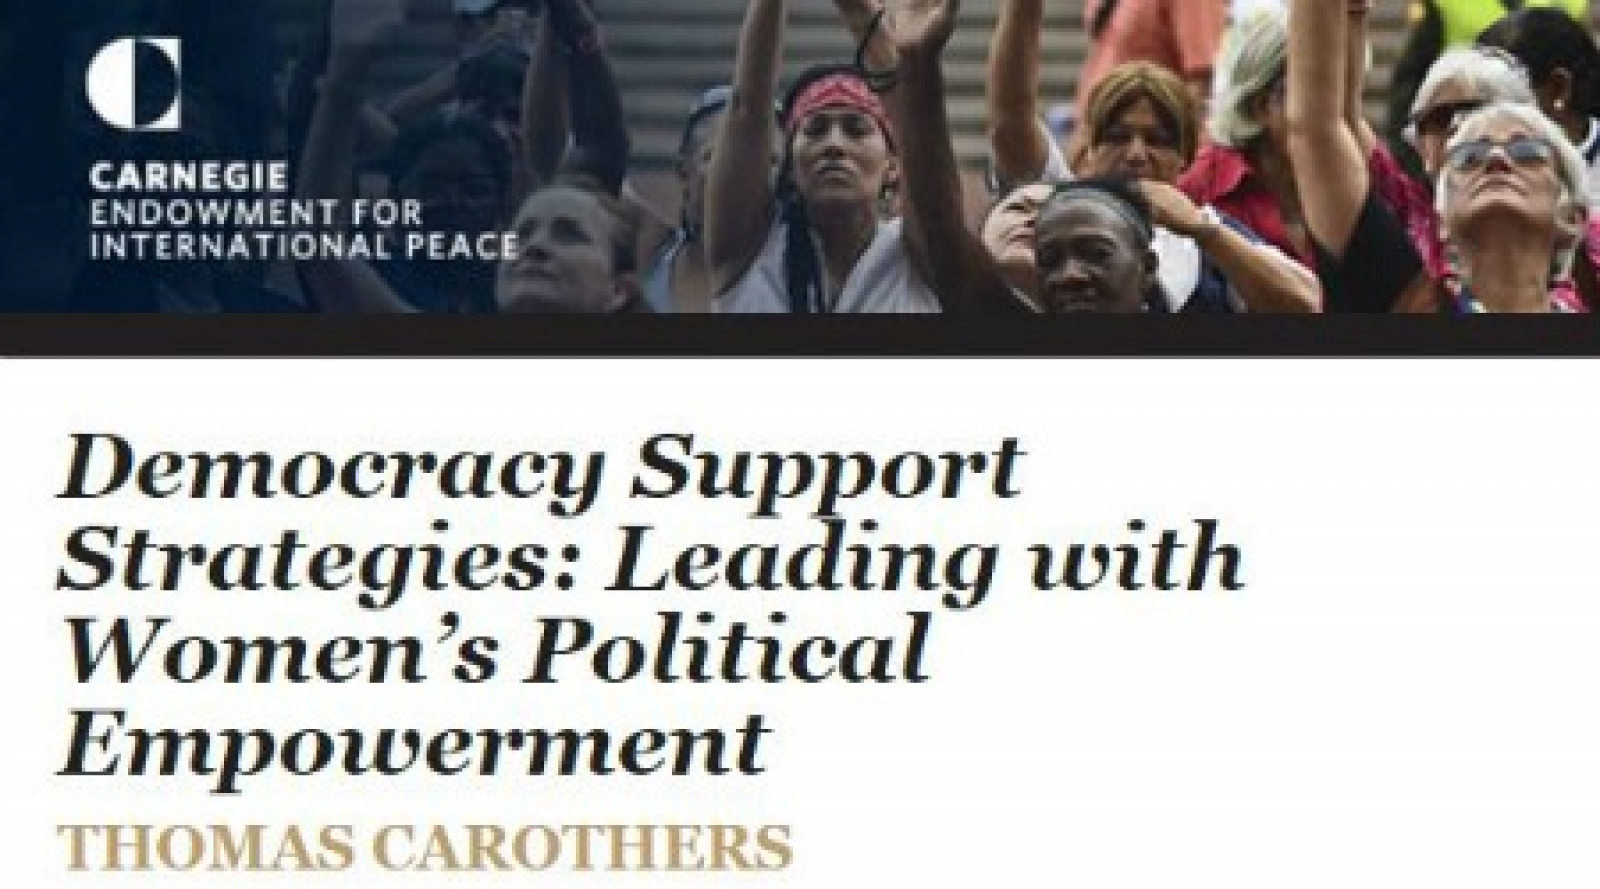 NDI and Carnegie Collaborate on Gender and Democratization  